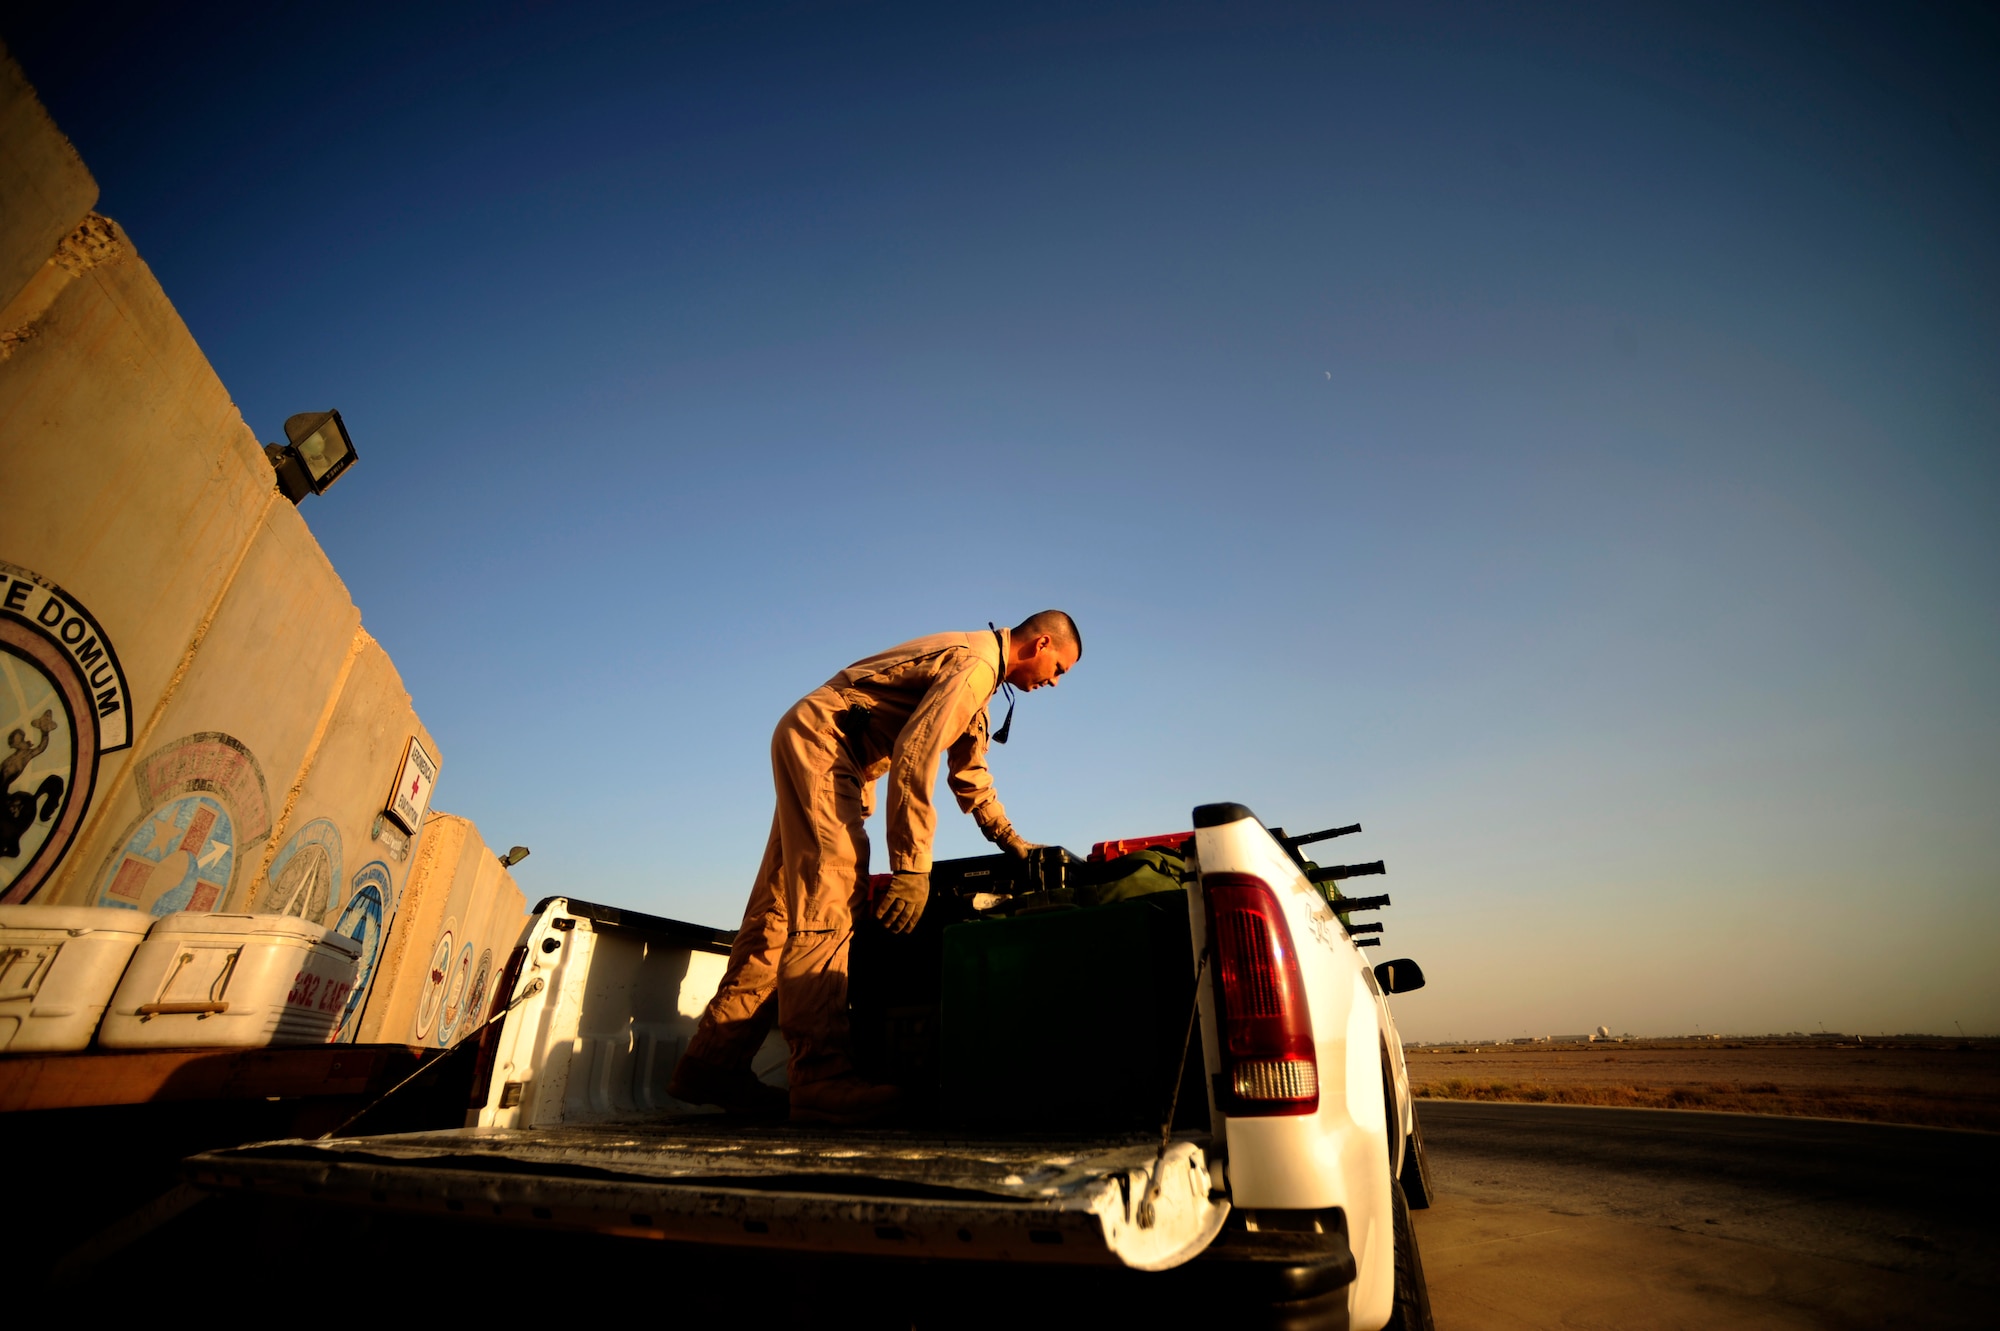 U.S. Air Force reservist Senior Master Sgt. Tony Staut a aeromedical evacuation technician assigned to the 362nd Expeditionary Aeromedical Evacuation Flight, loads gear in pick up for transit to the plane prior to flying mission at Joint Base Balad, Iraq on July 17, 2010.
(U.S. Air Force photo by Staff Sgt. Andy M. Kin / Released)